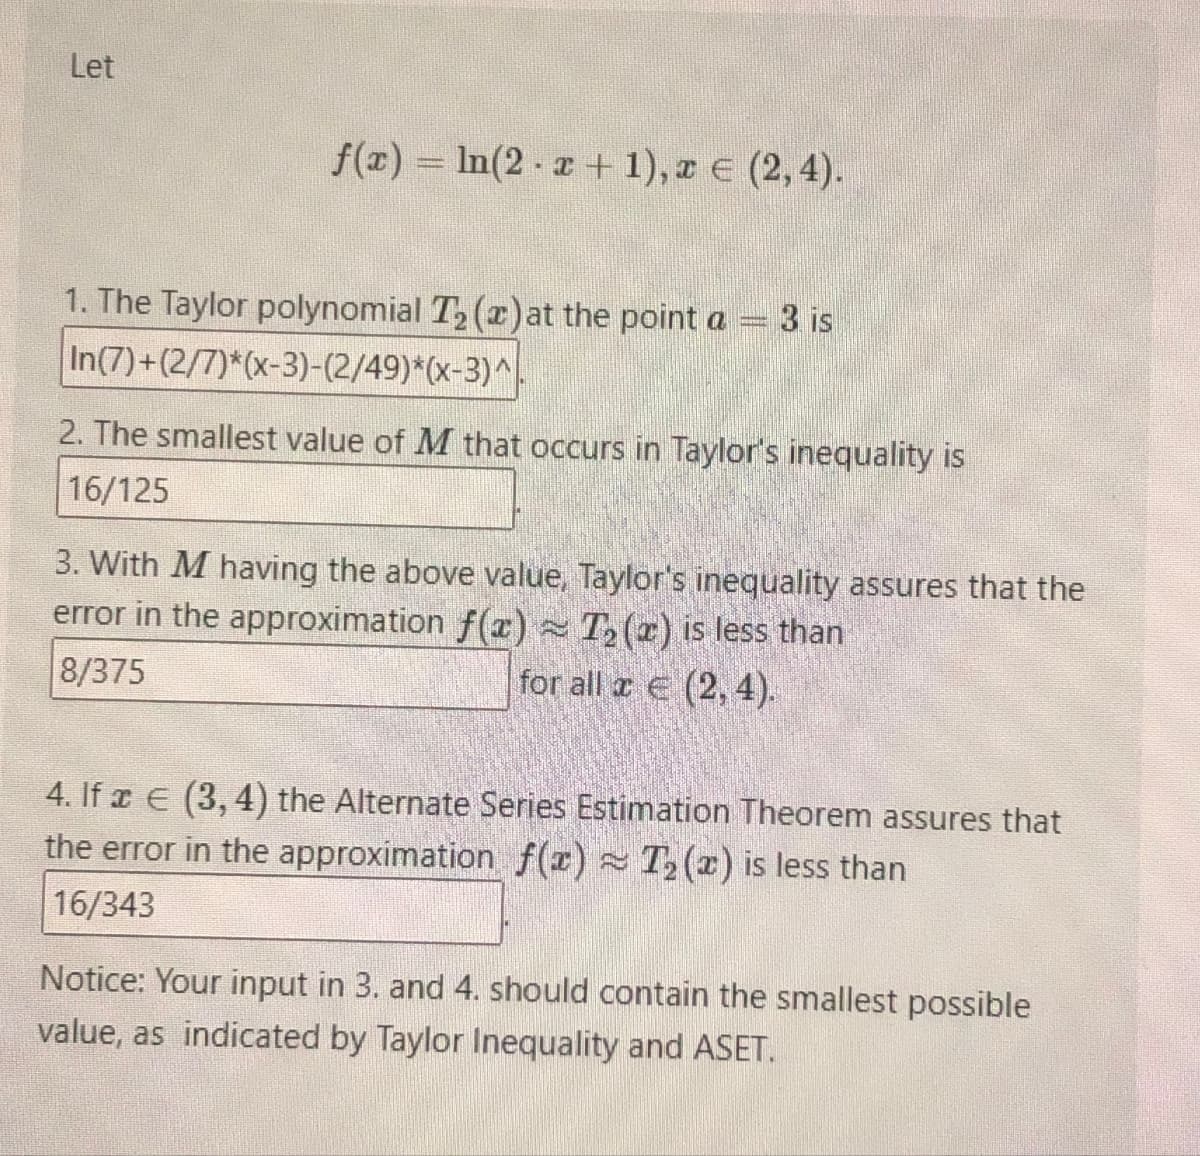 Let
f(x) = ln(2x+1), x = (2,4).
1. The Taylor polynomial T₂ (a) at the point a
In(7)+(2/7)*(x-3)-(2/49)*(x-3)^
3 is
2. The smallest value of M that occurs in Taylor's inequality is
16/125
3. With M having the above value, Taylor's inequality assures that the
error in the approximation f(x) ≈ T₂ (2) is less than
8/375
for all € (2,4).
4. If (3,4) the Alternate Series Estimation Theorem assures that
the error in the approximation f(x) T₂(2) is less than
16/343
Notice: Your input in 3. and 4. should contain the smallest possible
value, as indicated by Taylor Inequality and ASET.